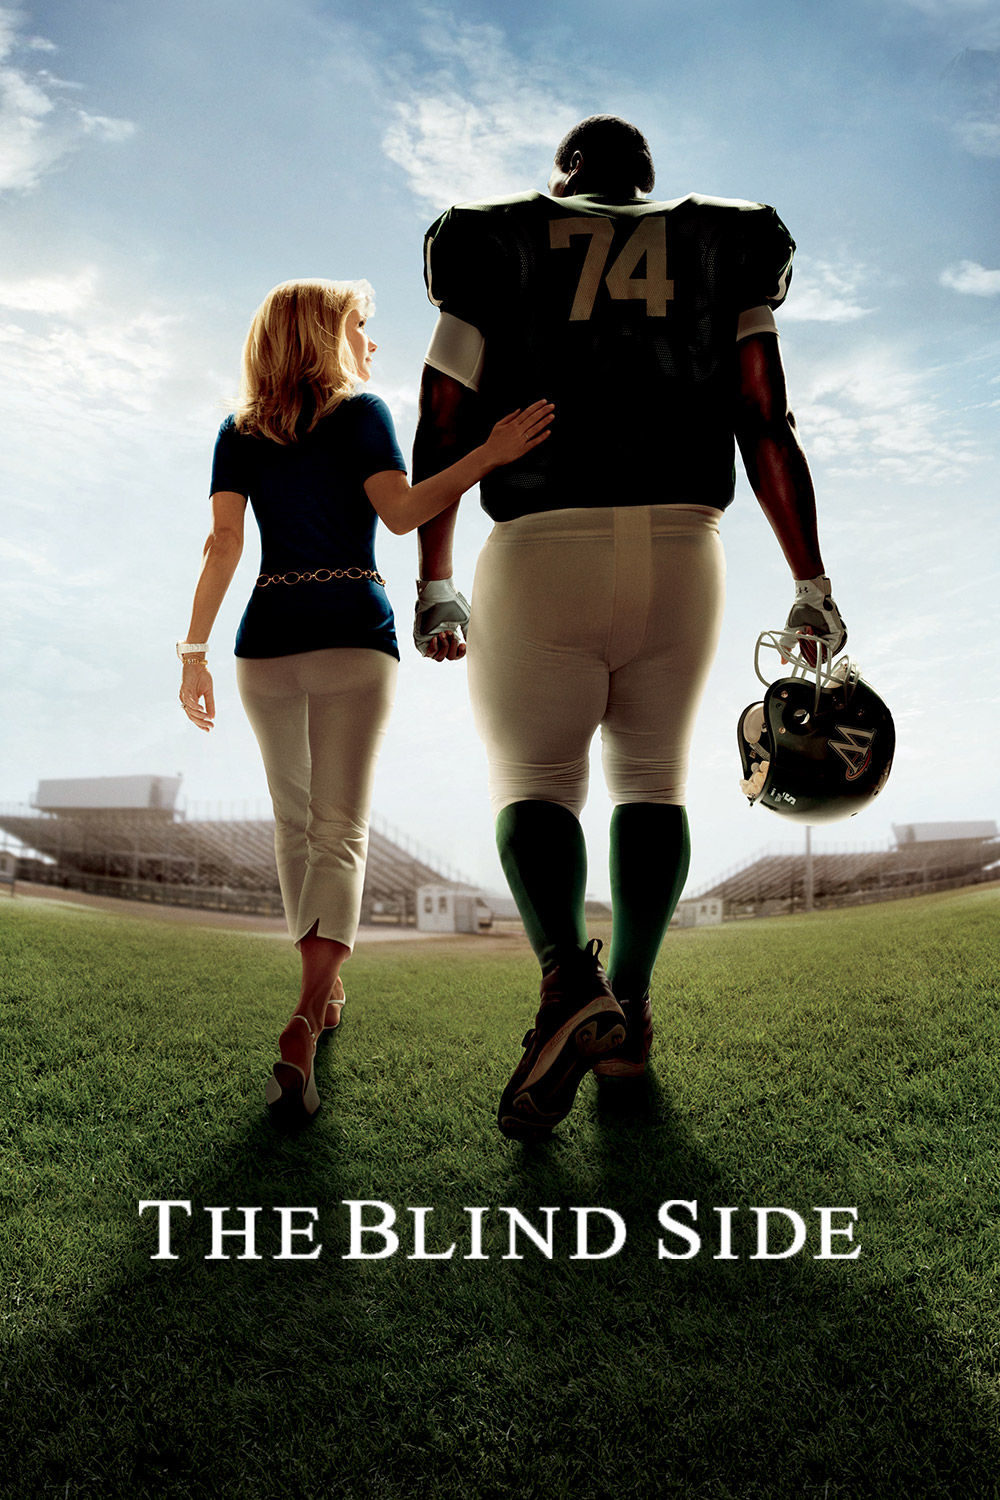 Watch The Blind Side Movie Online in HD Reviews, Cast & Release Date